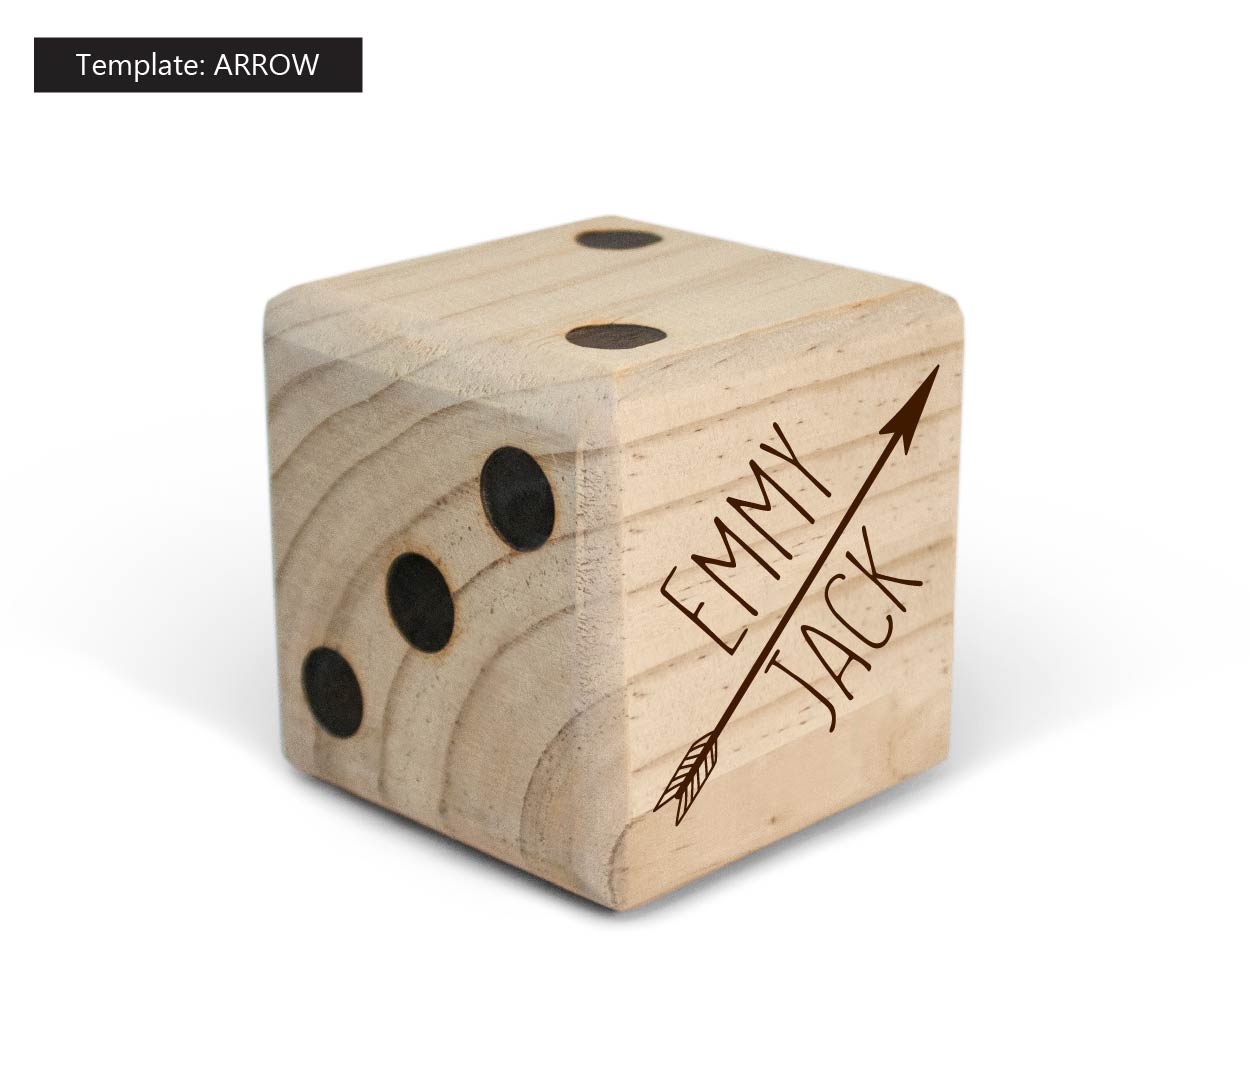 Customized Giant Wooden Yard Dice